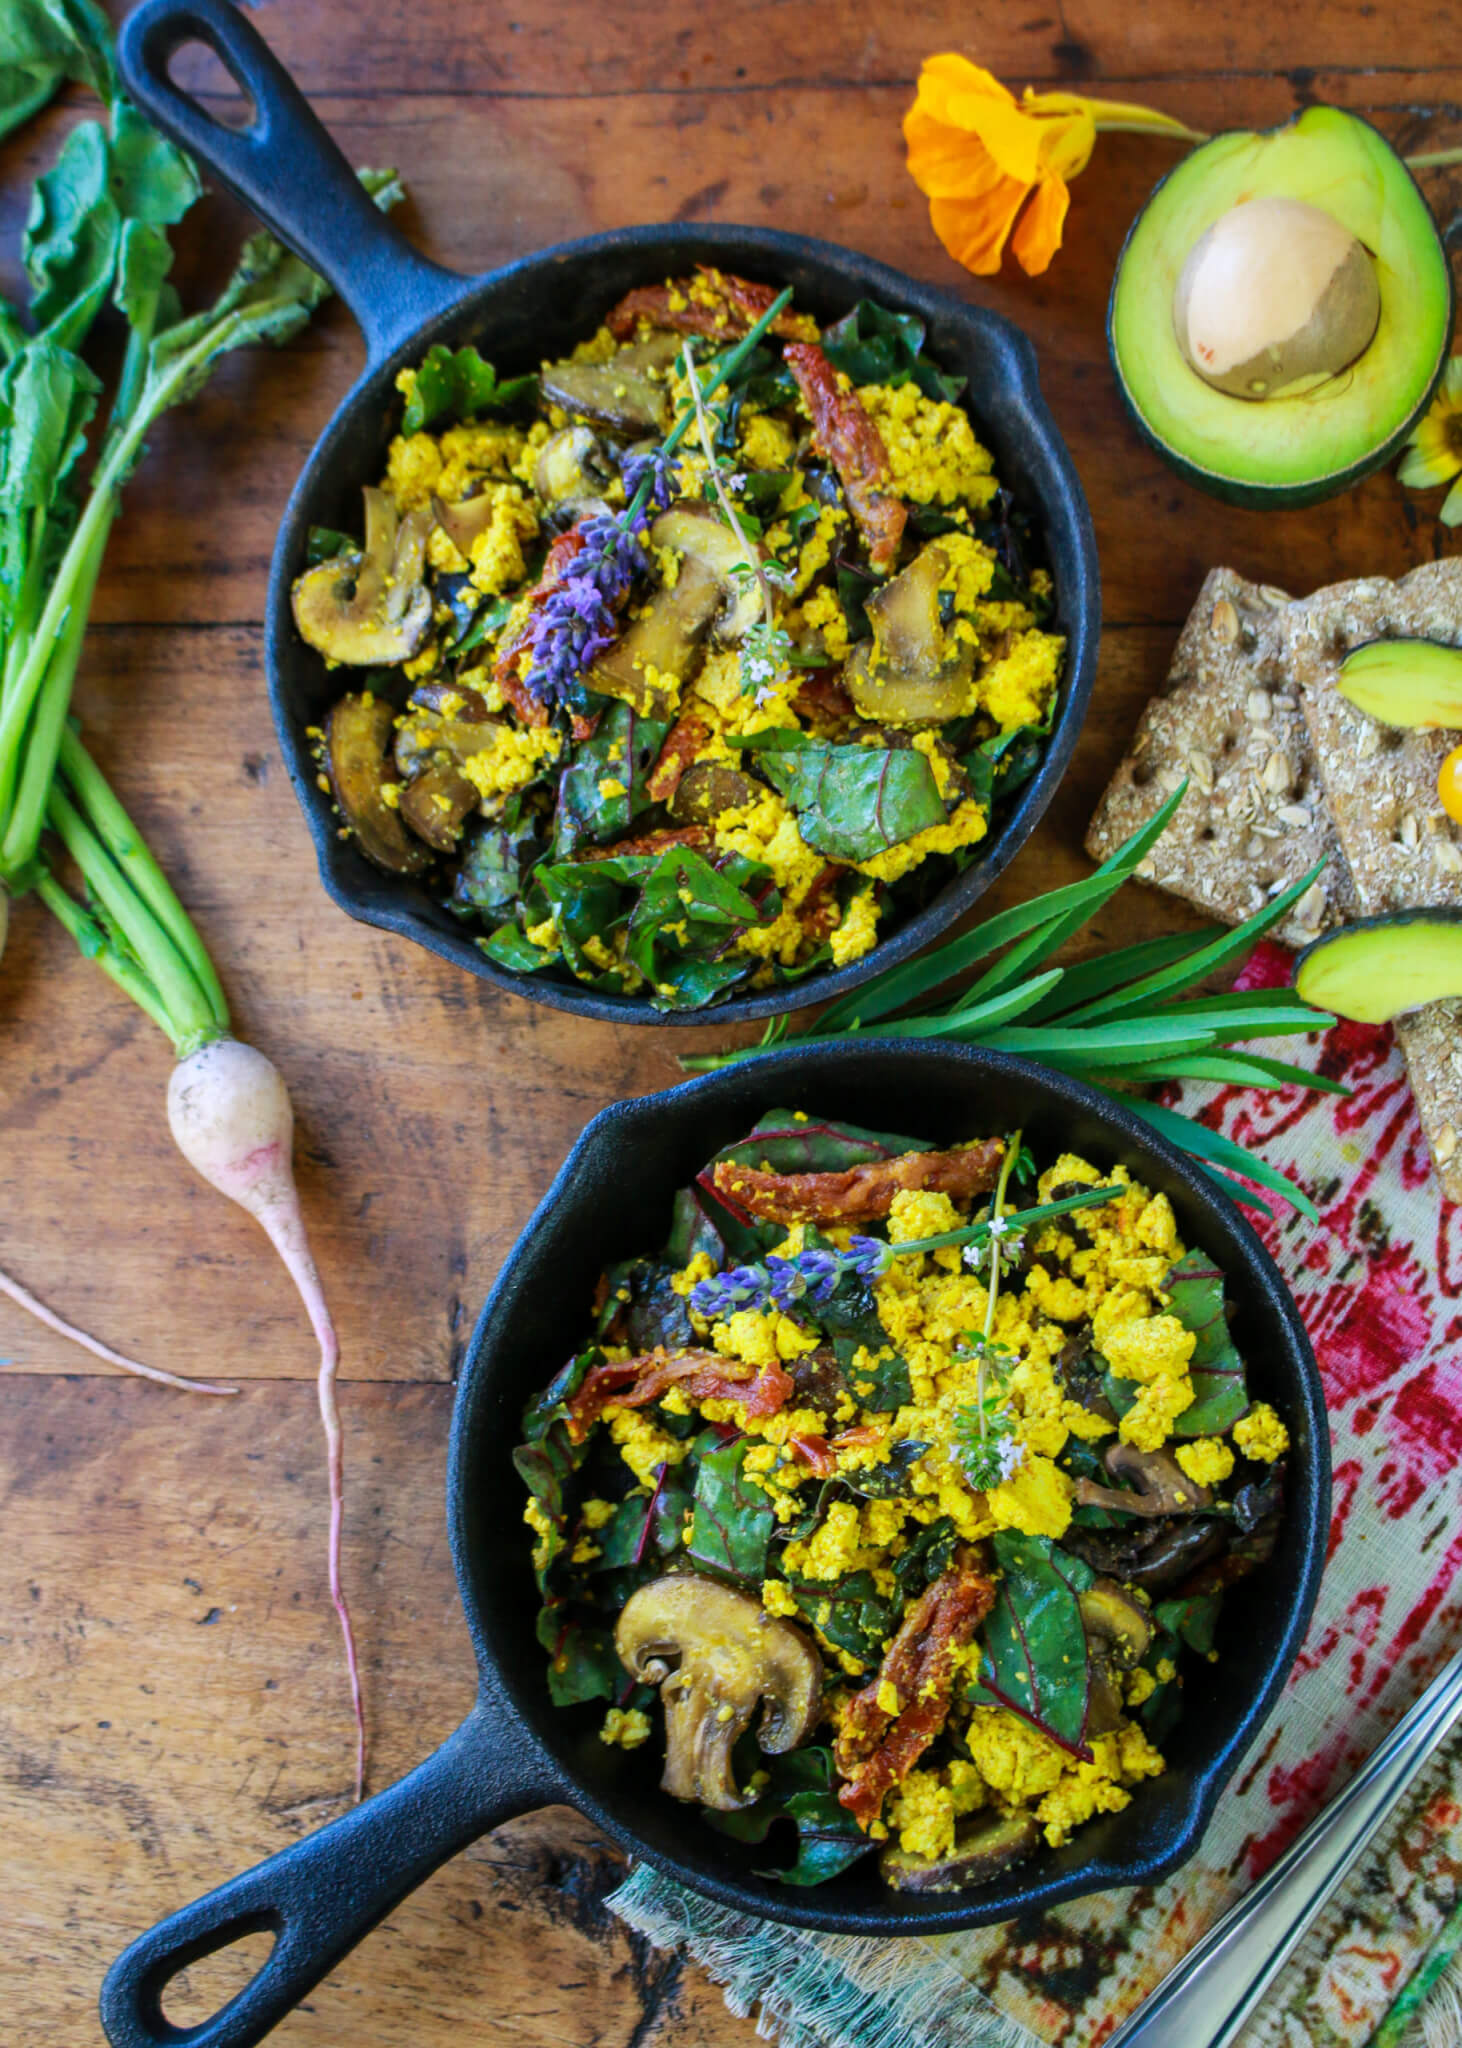 5 Protein-Rich Plant-Based Breakfasts